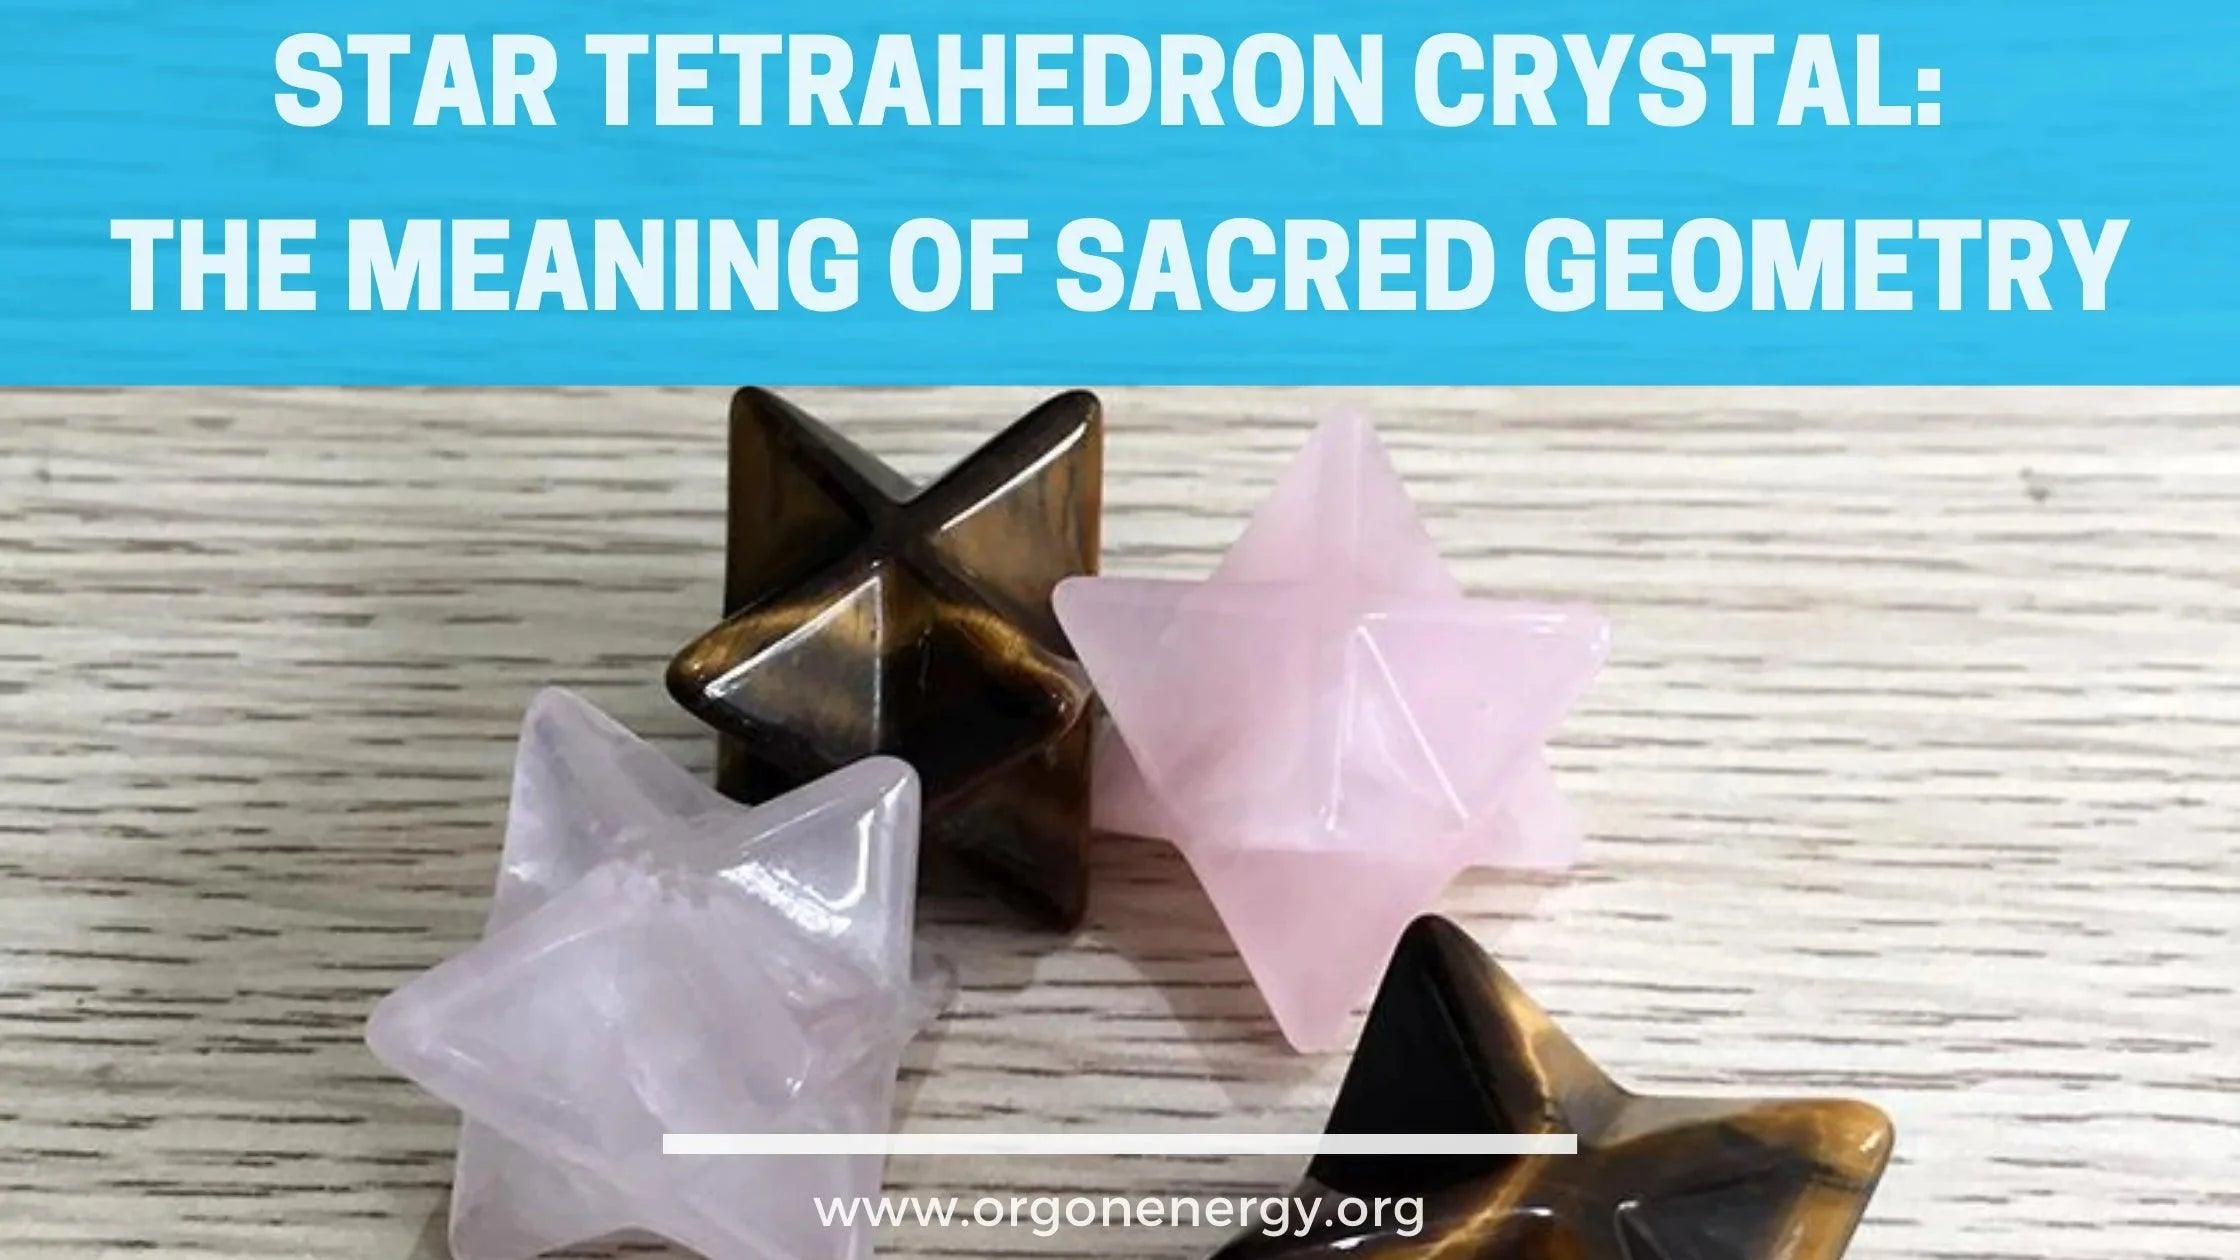 Star Tetrahedron Crystal: The Meaning of Sacred Geometry - Orgone Energy Australia